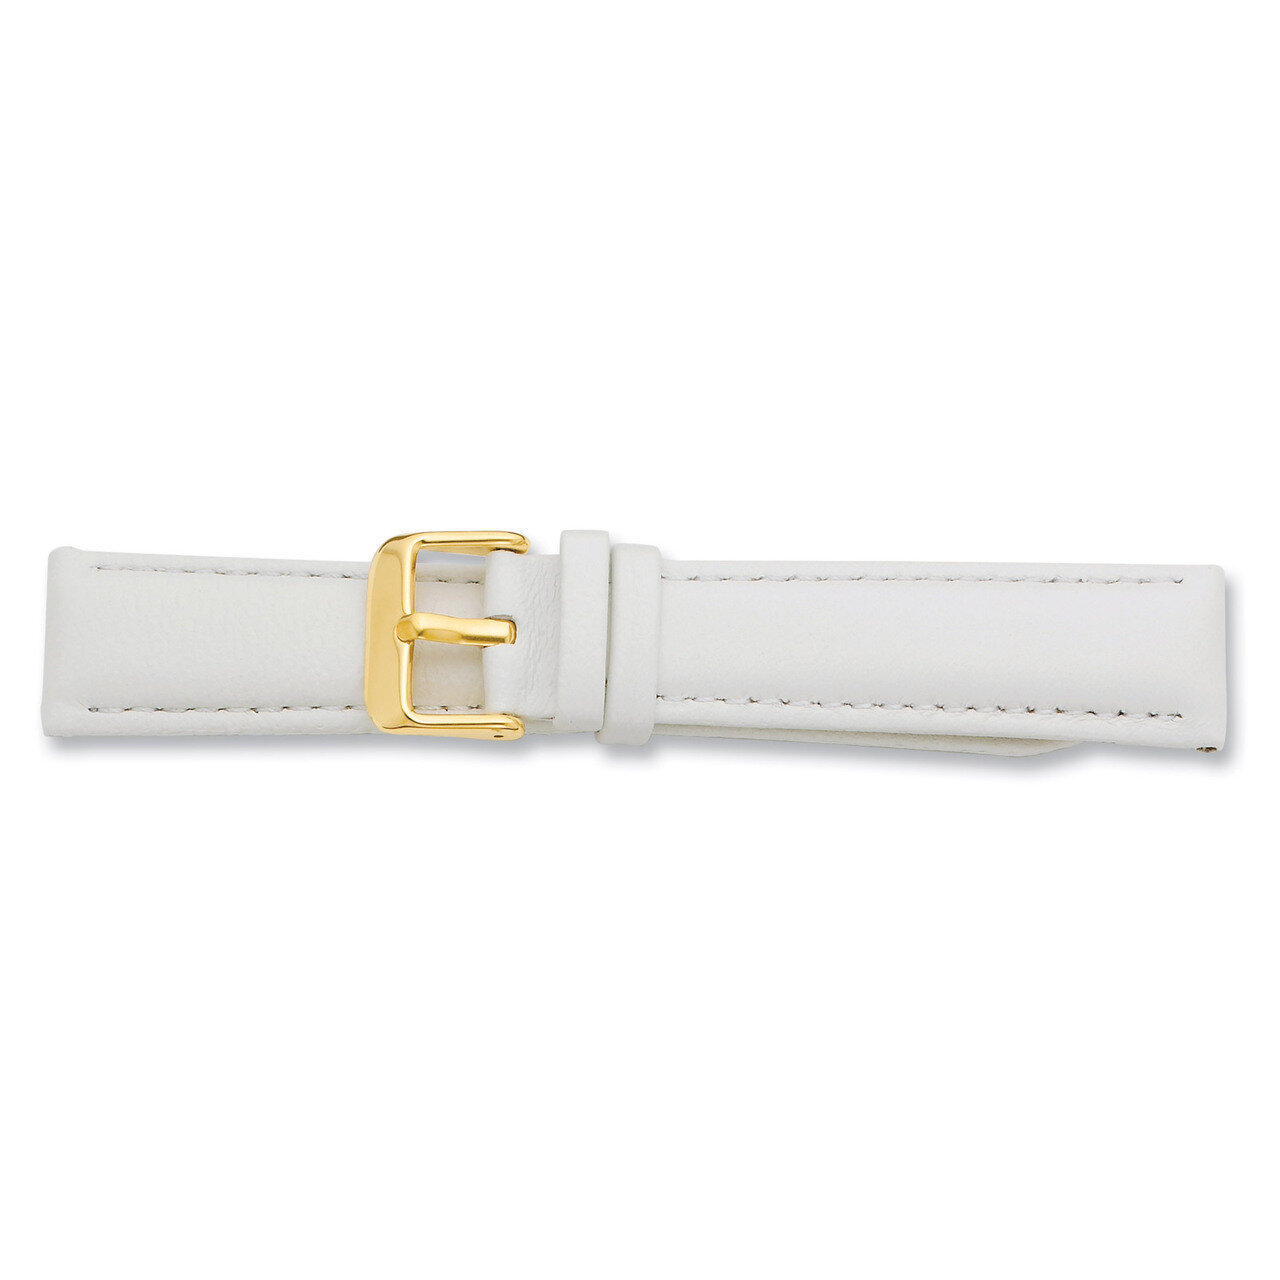 18mm White Glove Leather Buckle Watch Band 7.75 Inch Gold-tone BA197-18